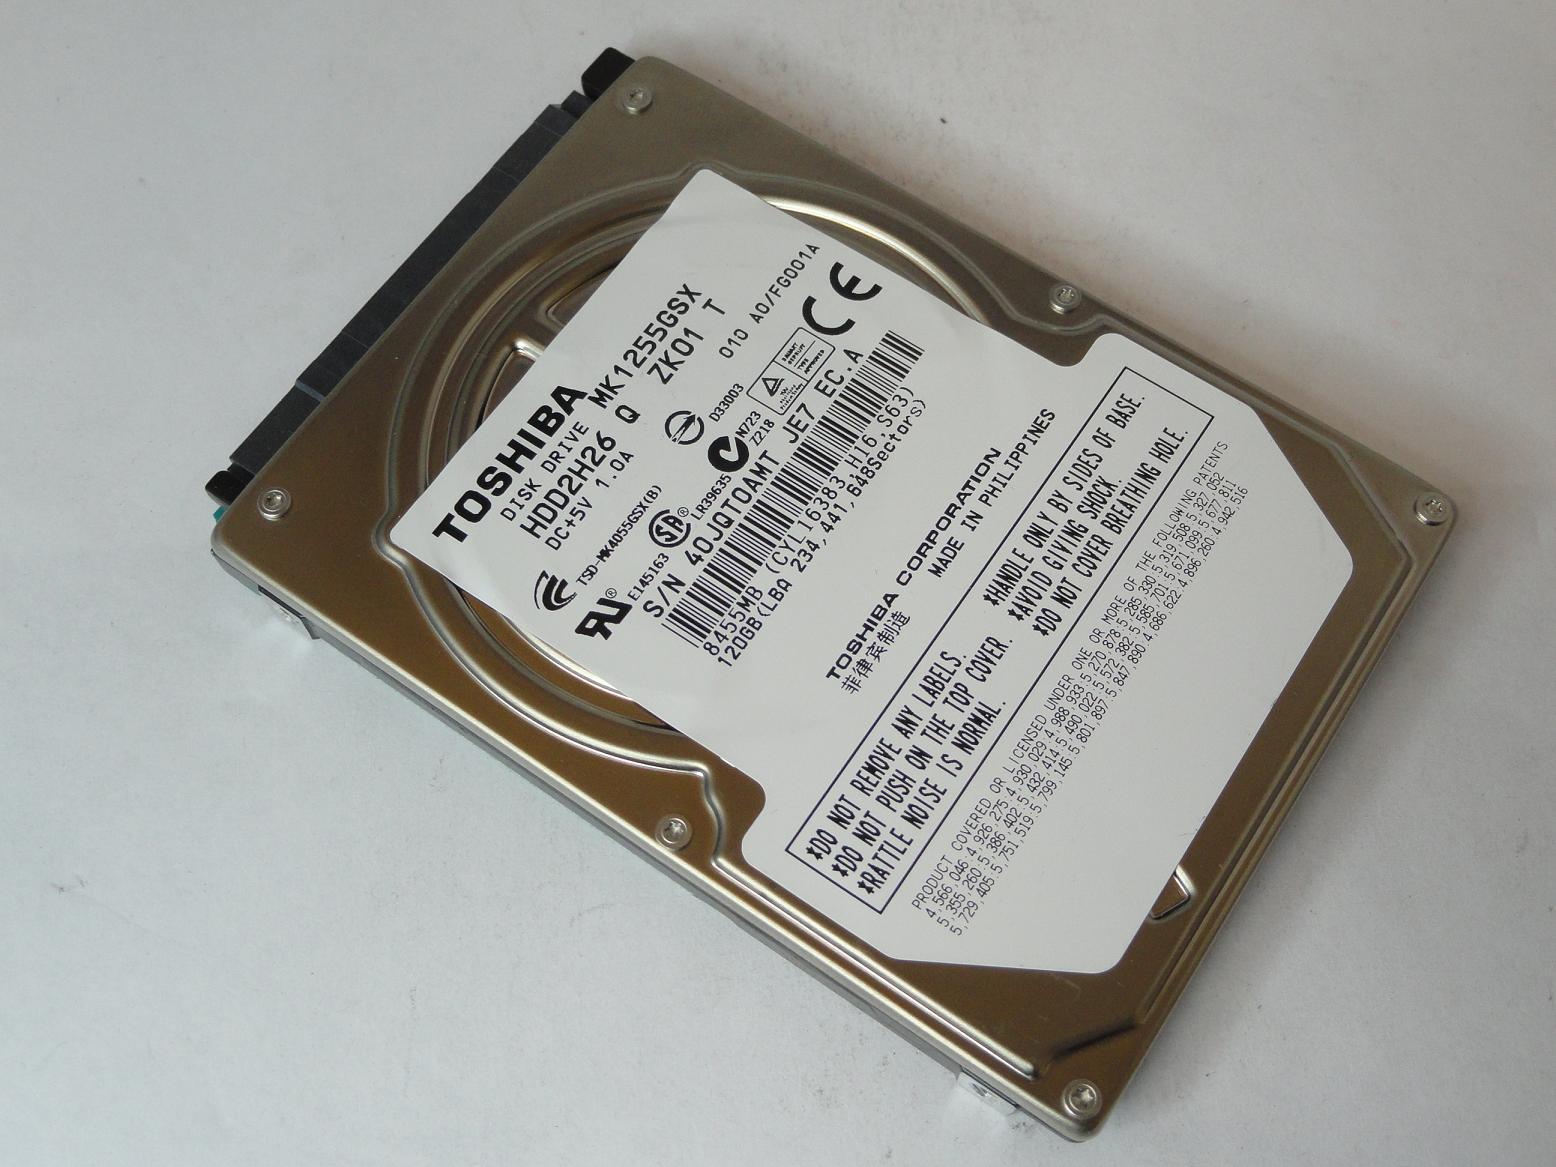 HDD2H26 - Toshiba 120GB SATA 5400rpm 2.5in Laptop HDD - USED